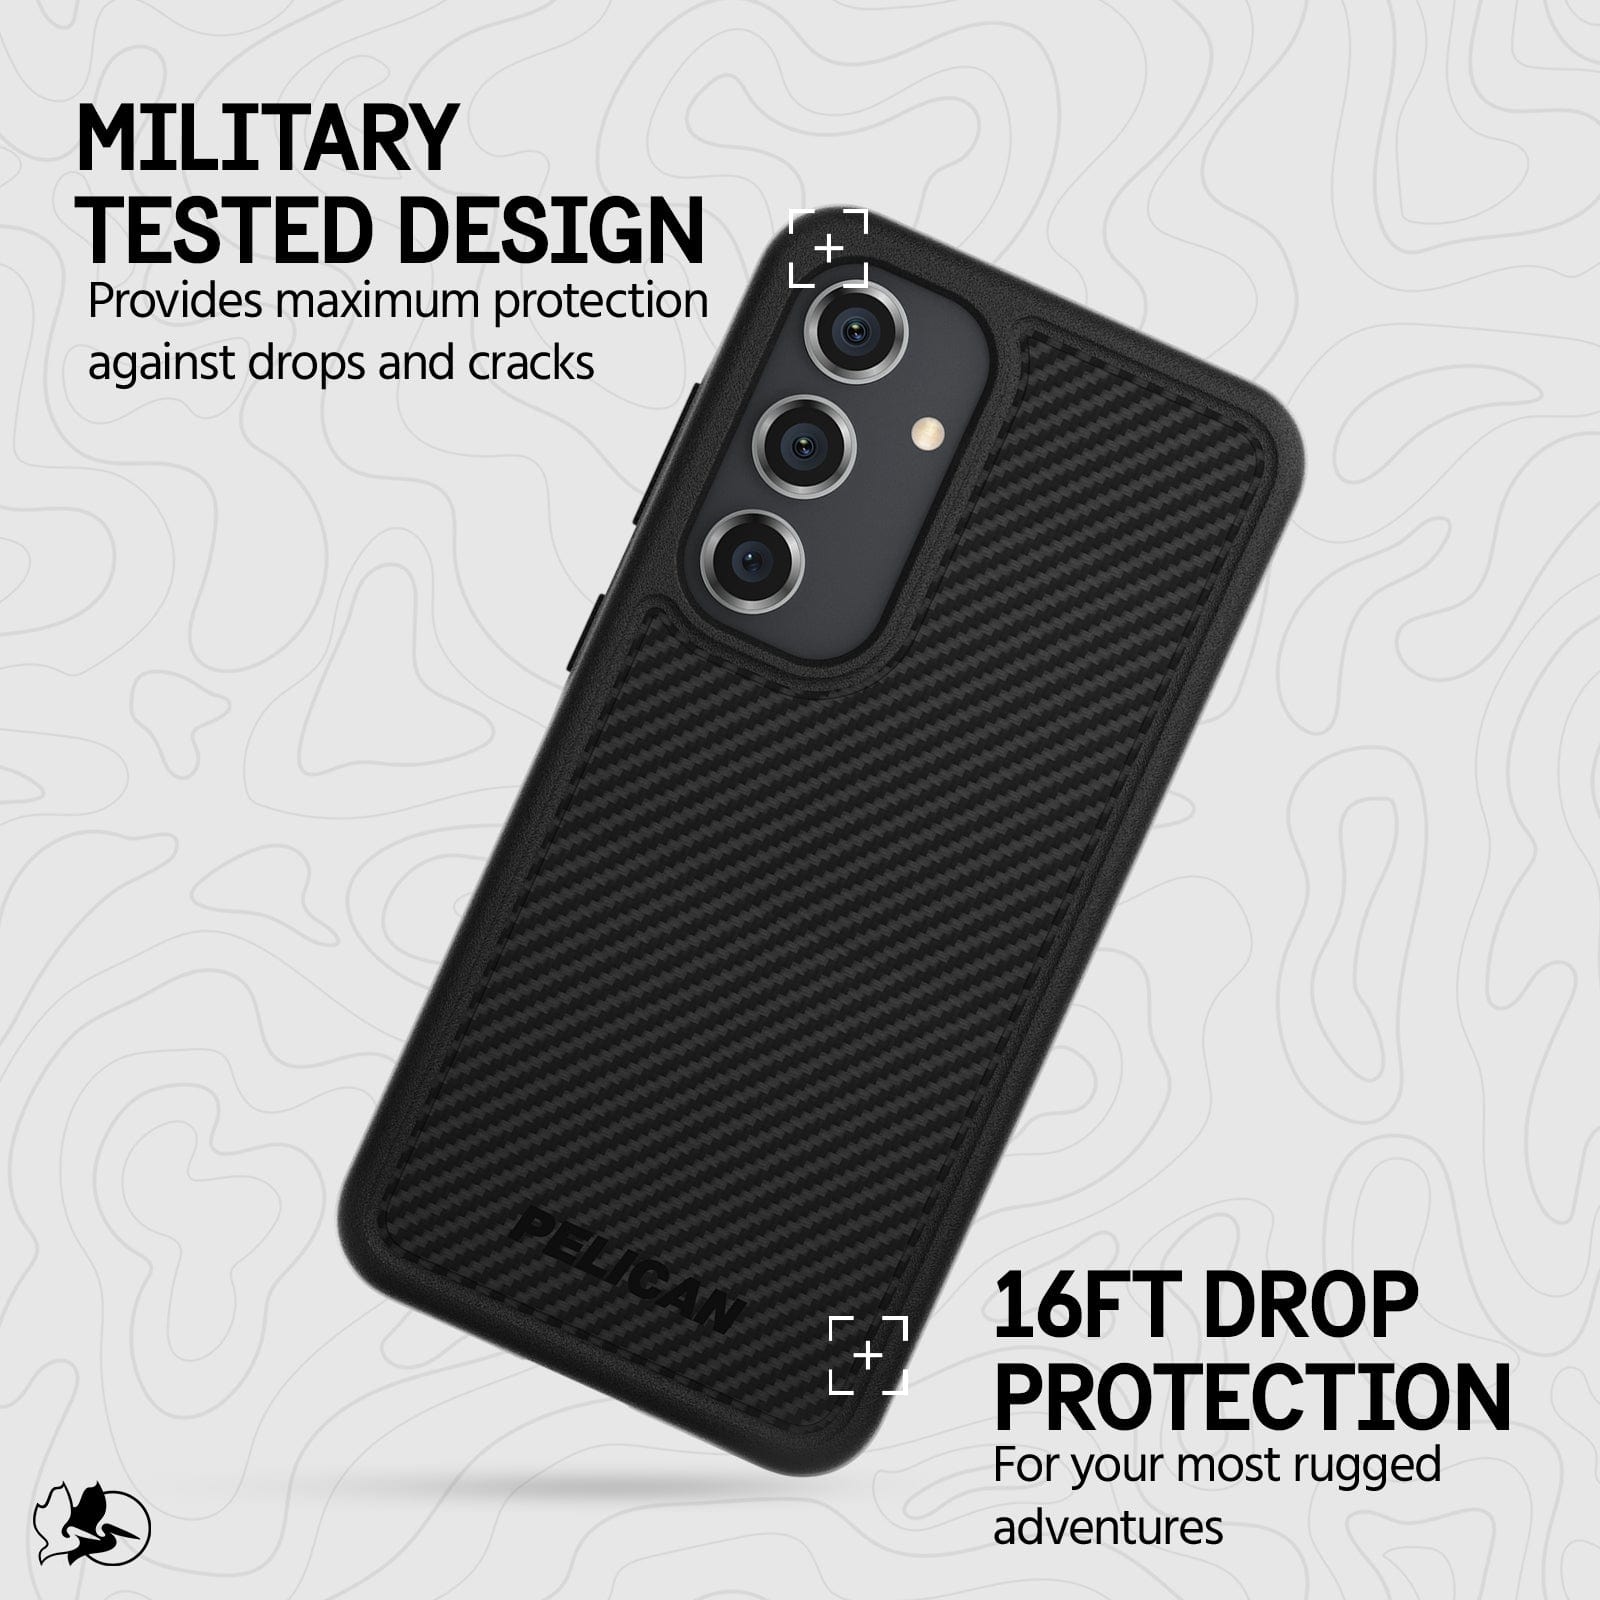 MILITARY TESTED DESIGN PROVIDES MAXIMUM PROTECTION AGAINST DROPS AND CRACK. 16FT DROP PROTECTION FOR YOUR MOST RUGGED ADVENTURES